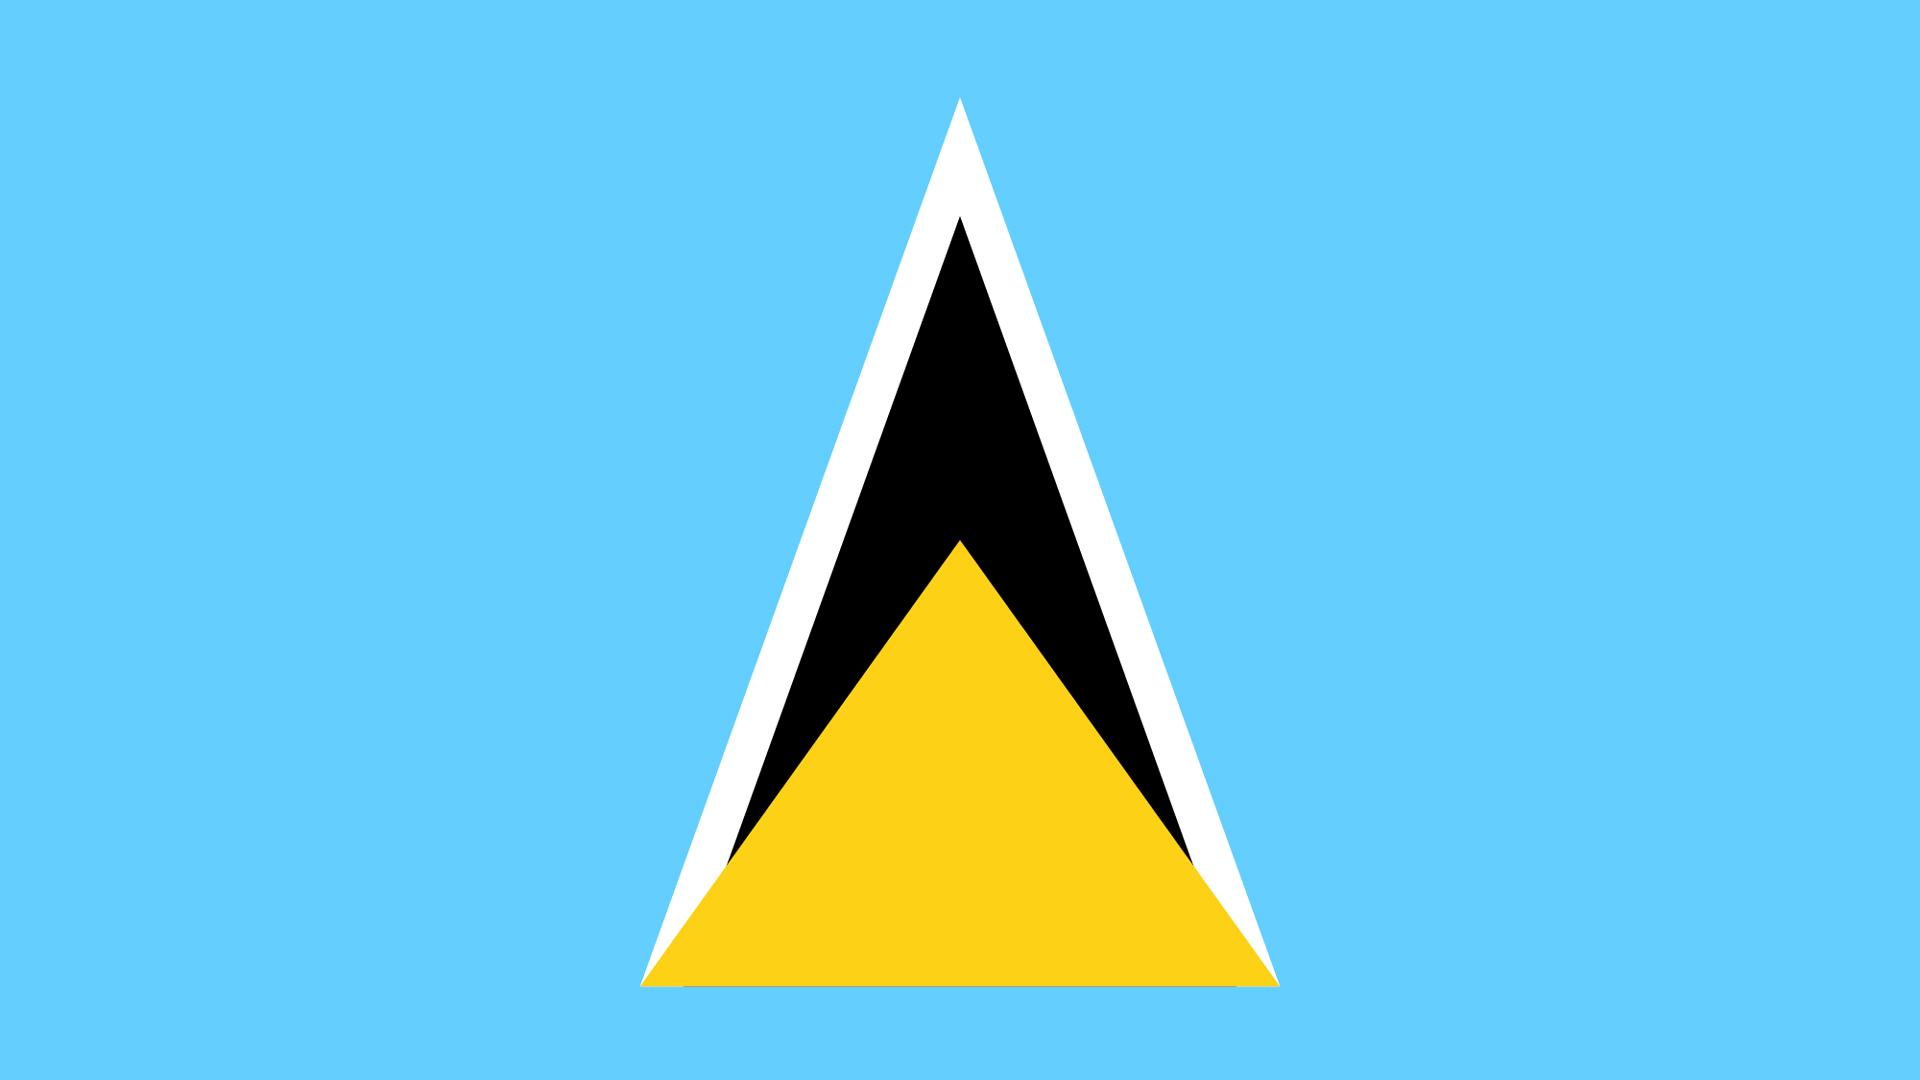 Saint Lucia Wallpapers